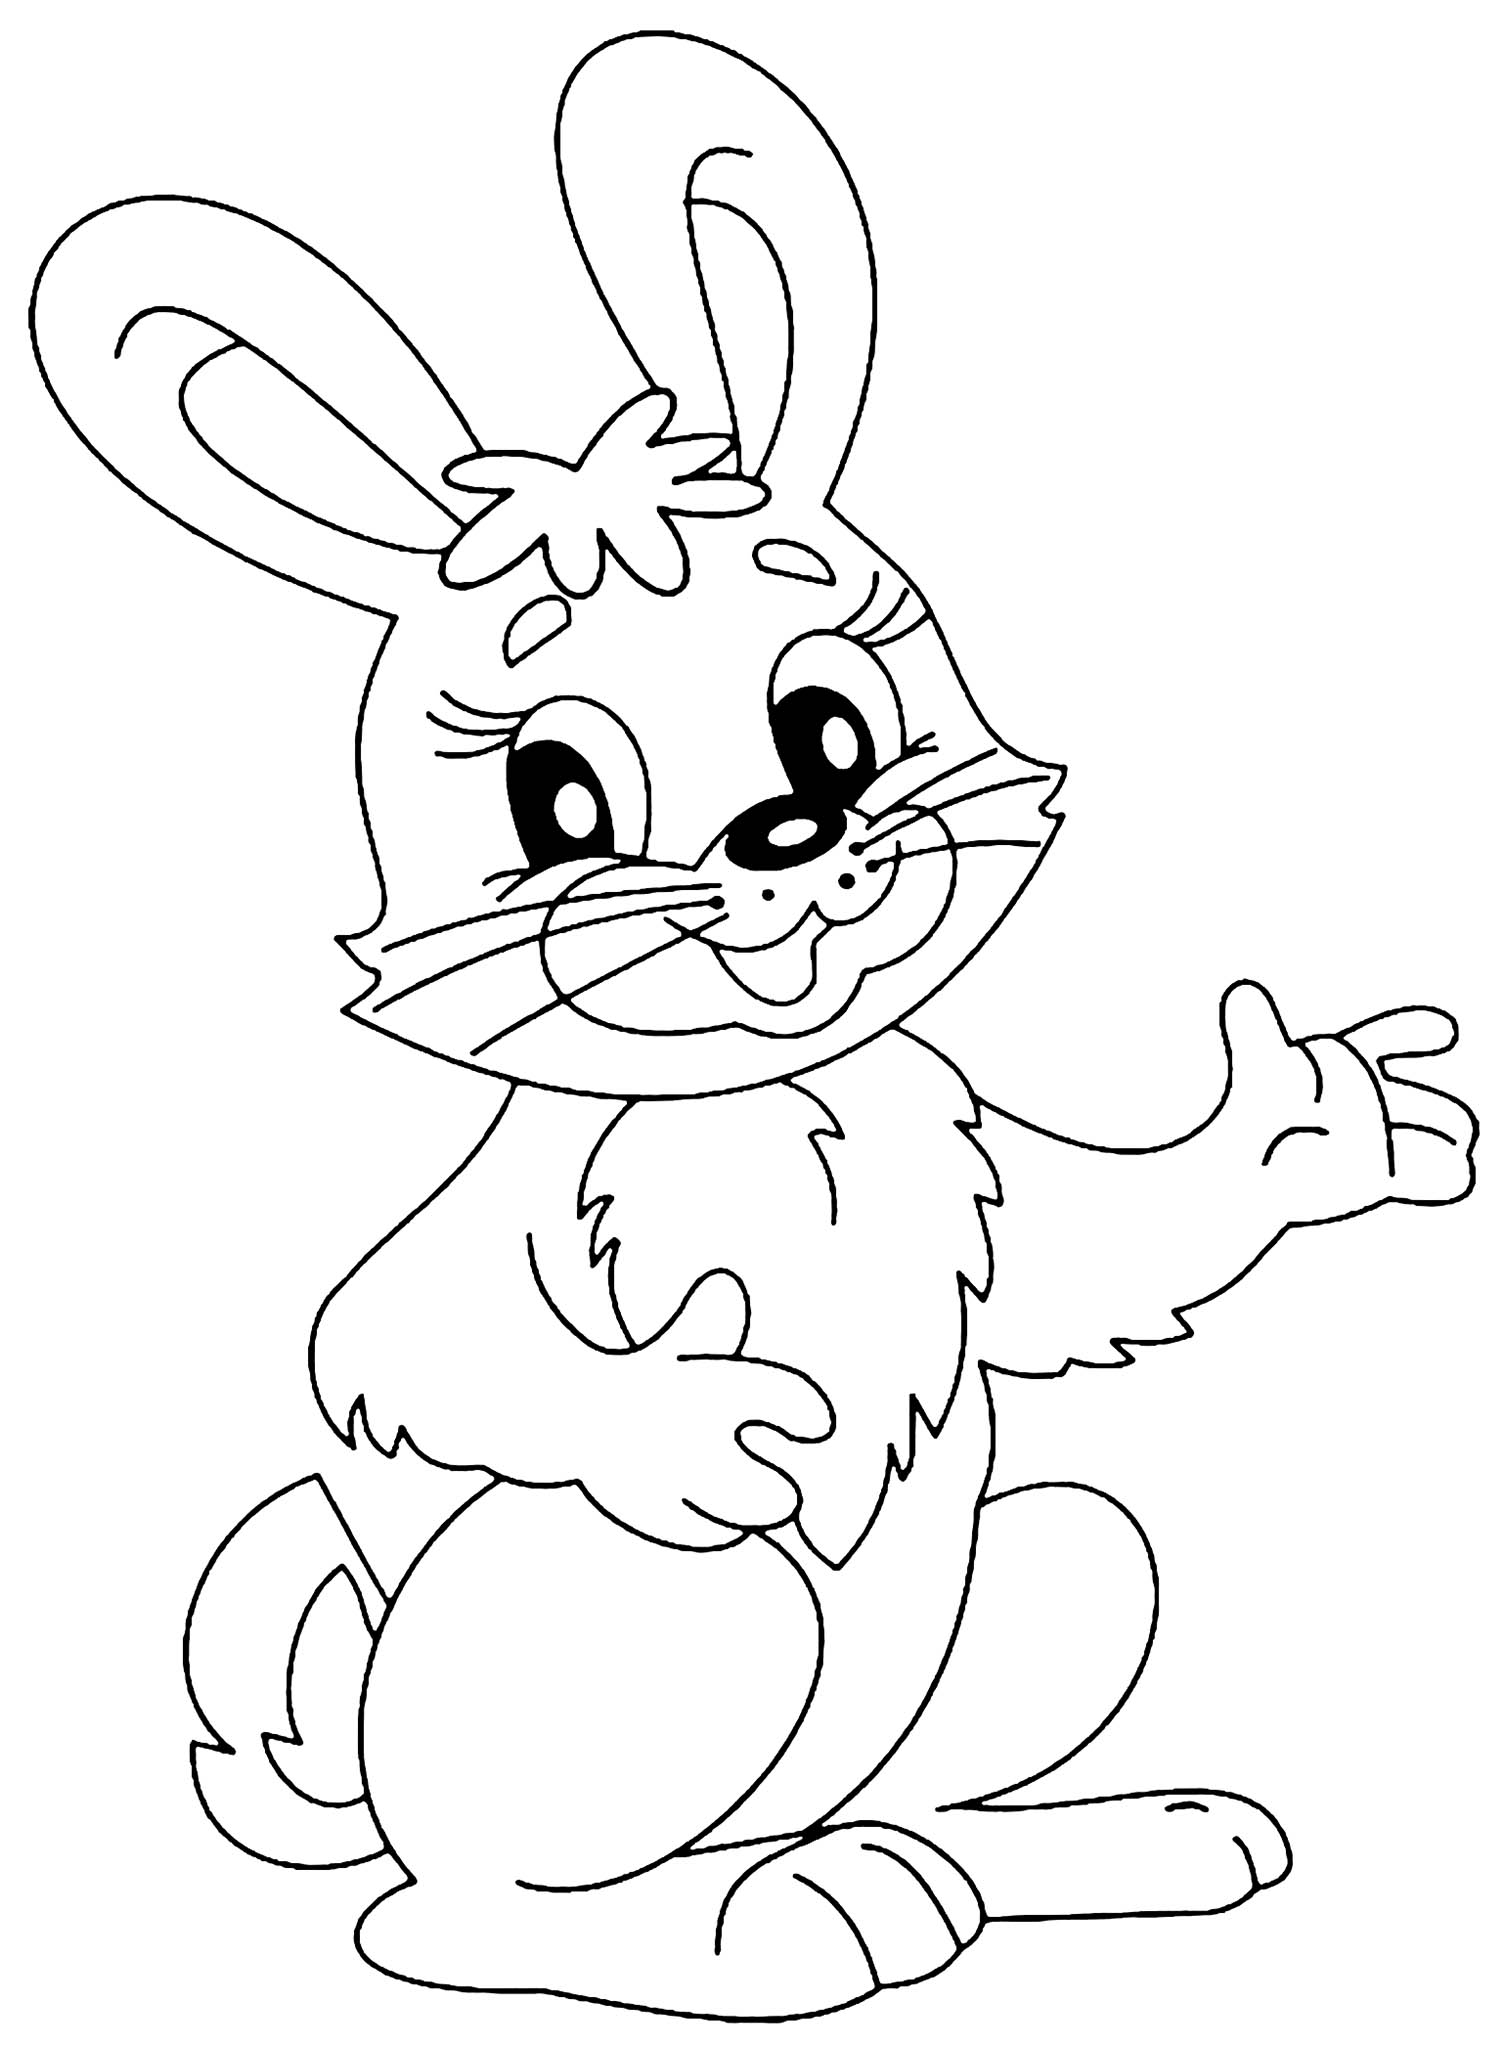 22+ Rabbit Pictures For Colouring | Homecolor : Homecolor